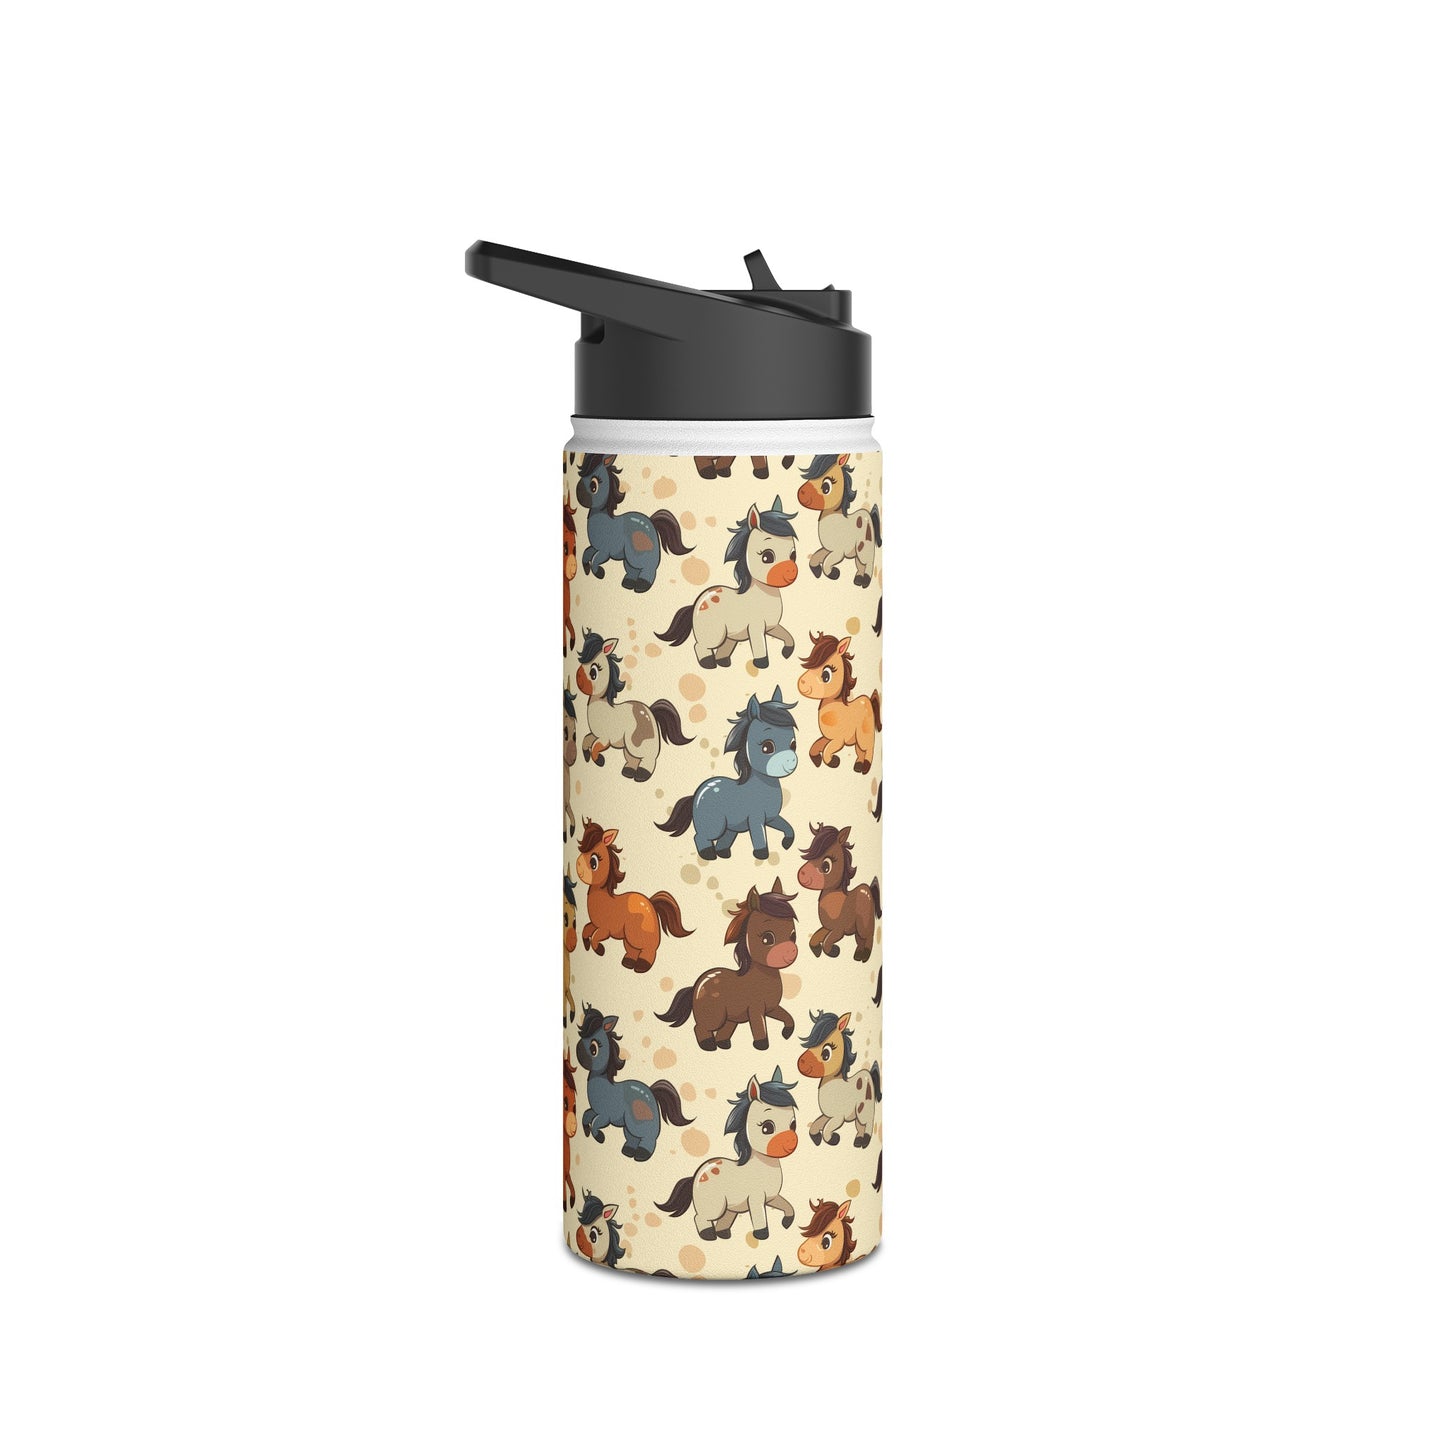 Insulated Water Bottle Thermos, 18oz, Cute Baby Horses - Double Walled Stainless Steel, Keeps Drinks Hot or Cold